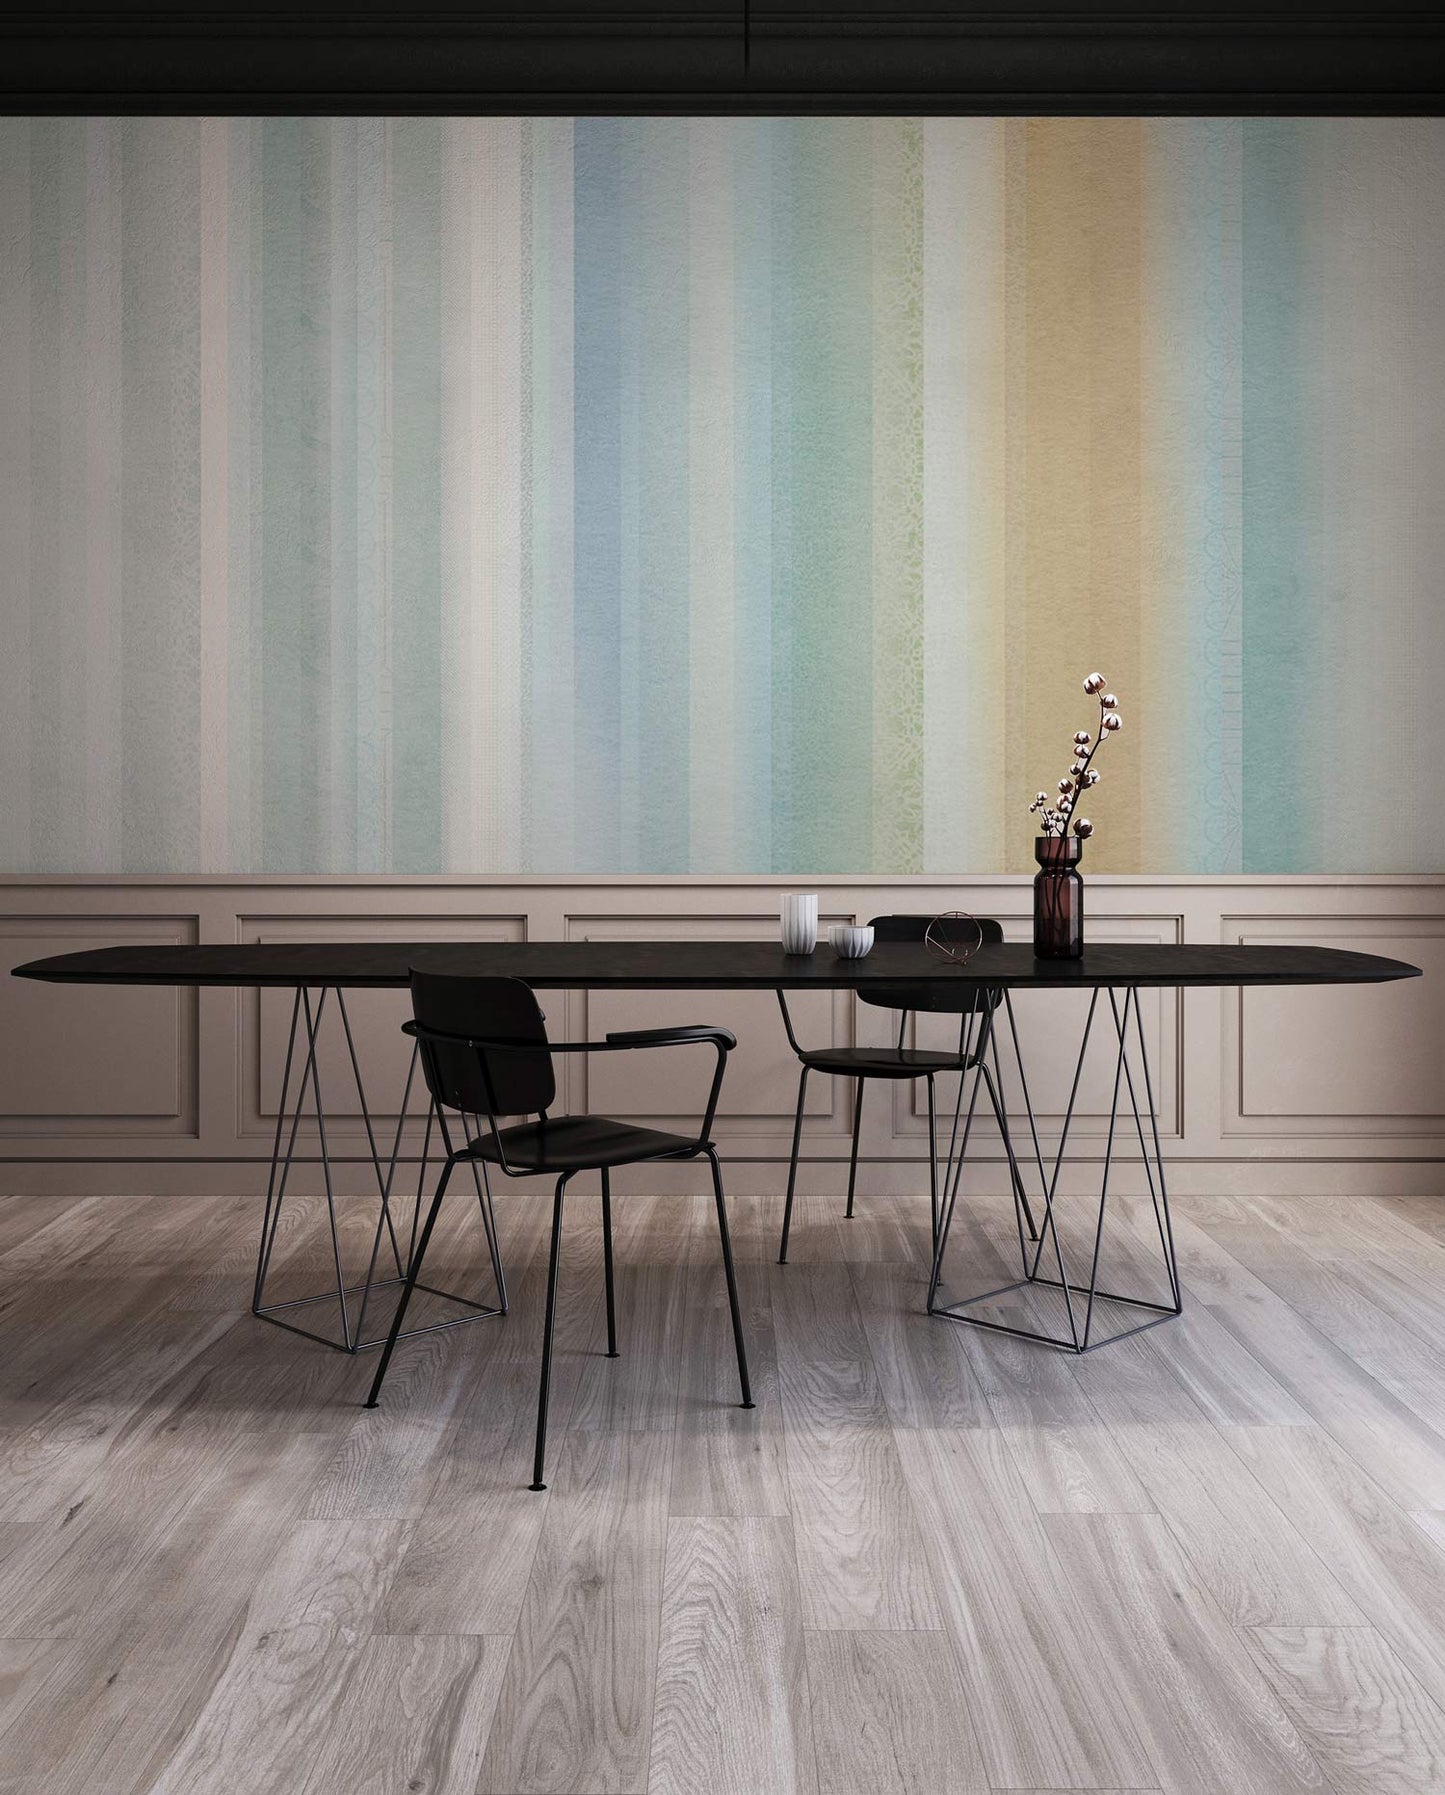 Wallpaper mural with colour and texture stripes for the dining room's decor